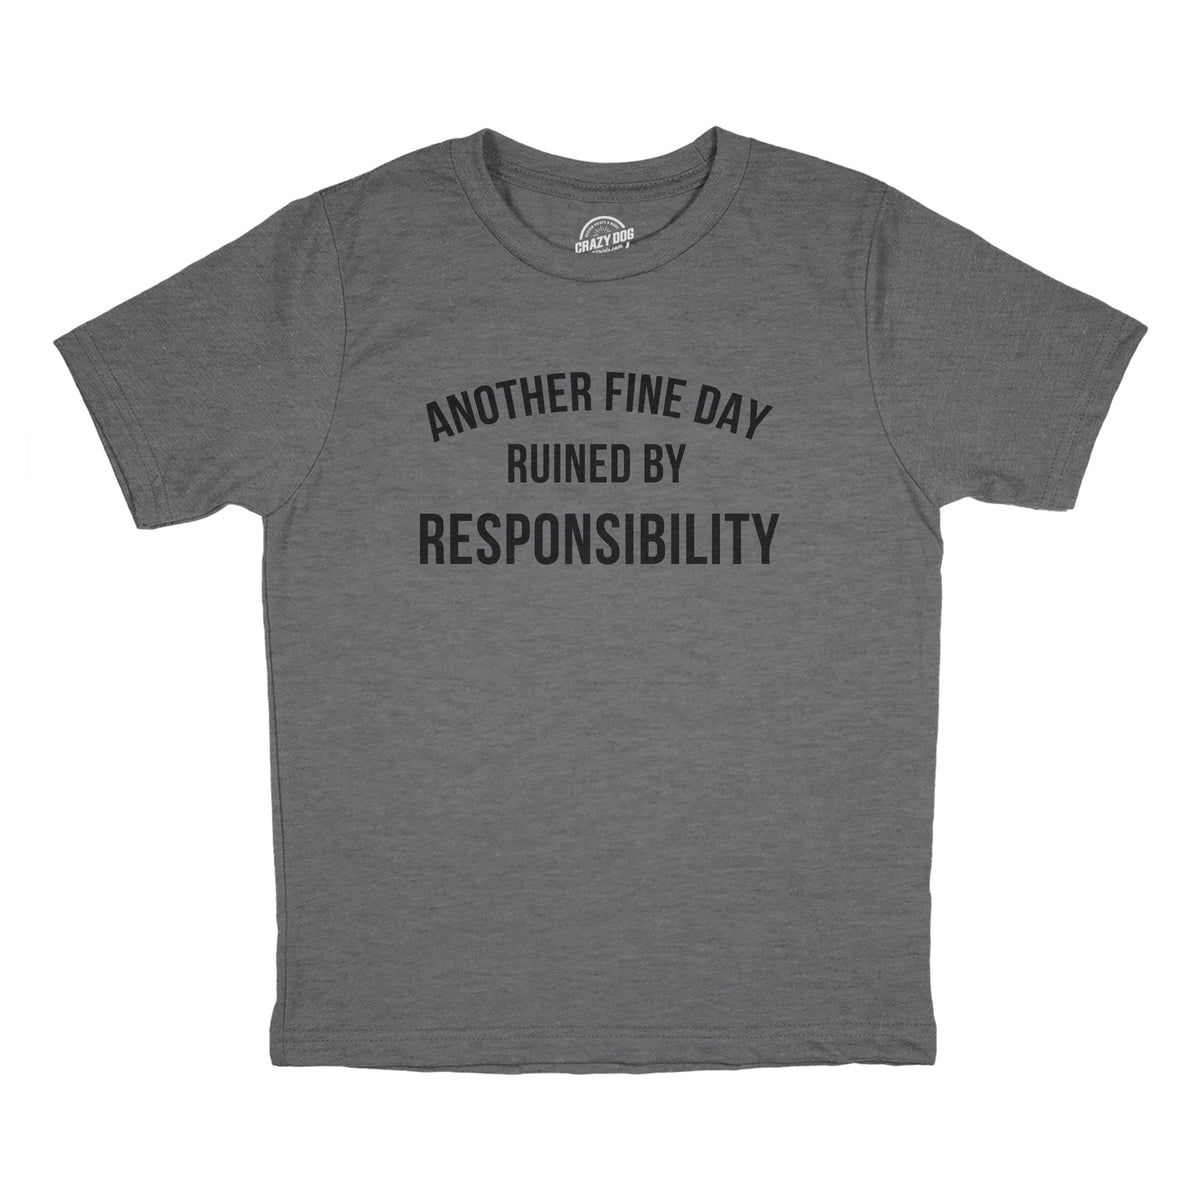 Funny Dark Heather Grey - RESPONSIBILITY Another Fine Day Ruined By Responsibility Youth T Shirt Nerdy Sarcastic Tee